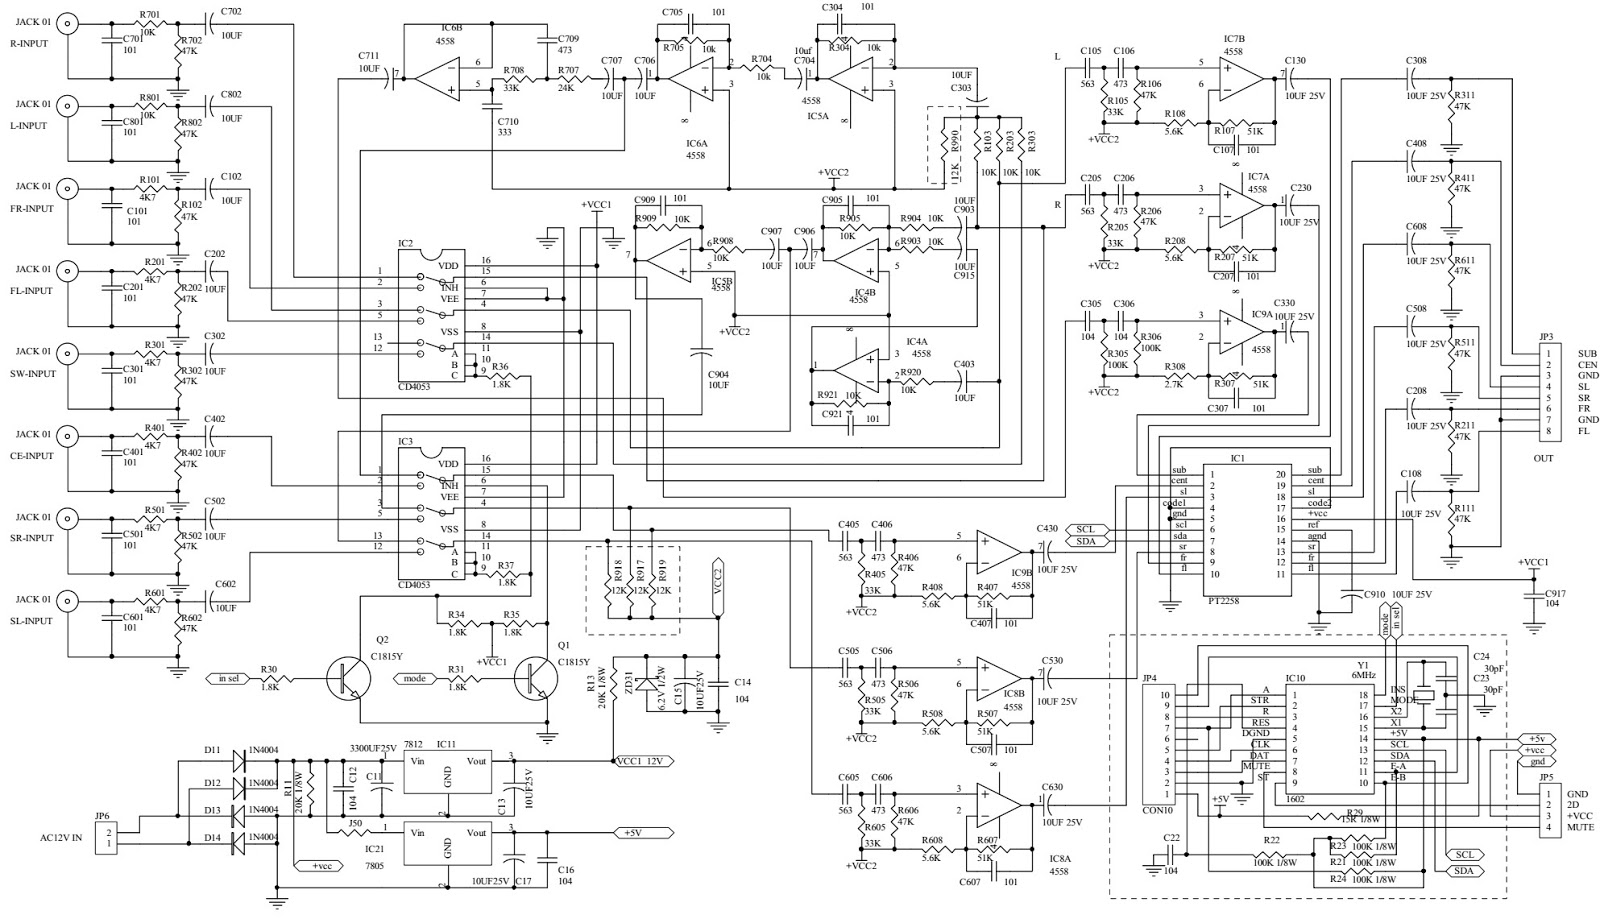 Sharp Lcd Inverter Schematic, Sharp, Free Engine Image For User Manual